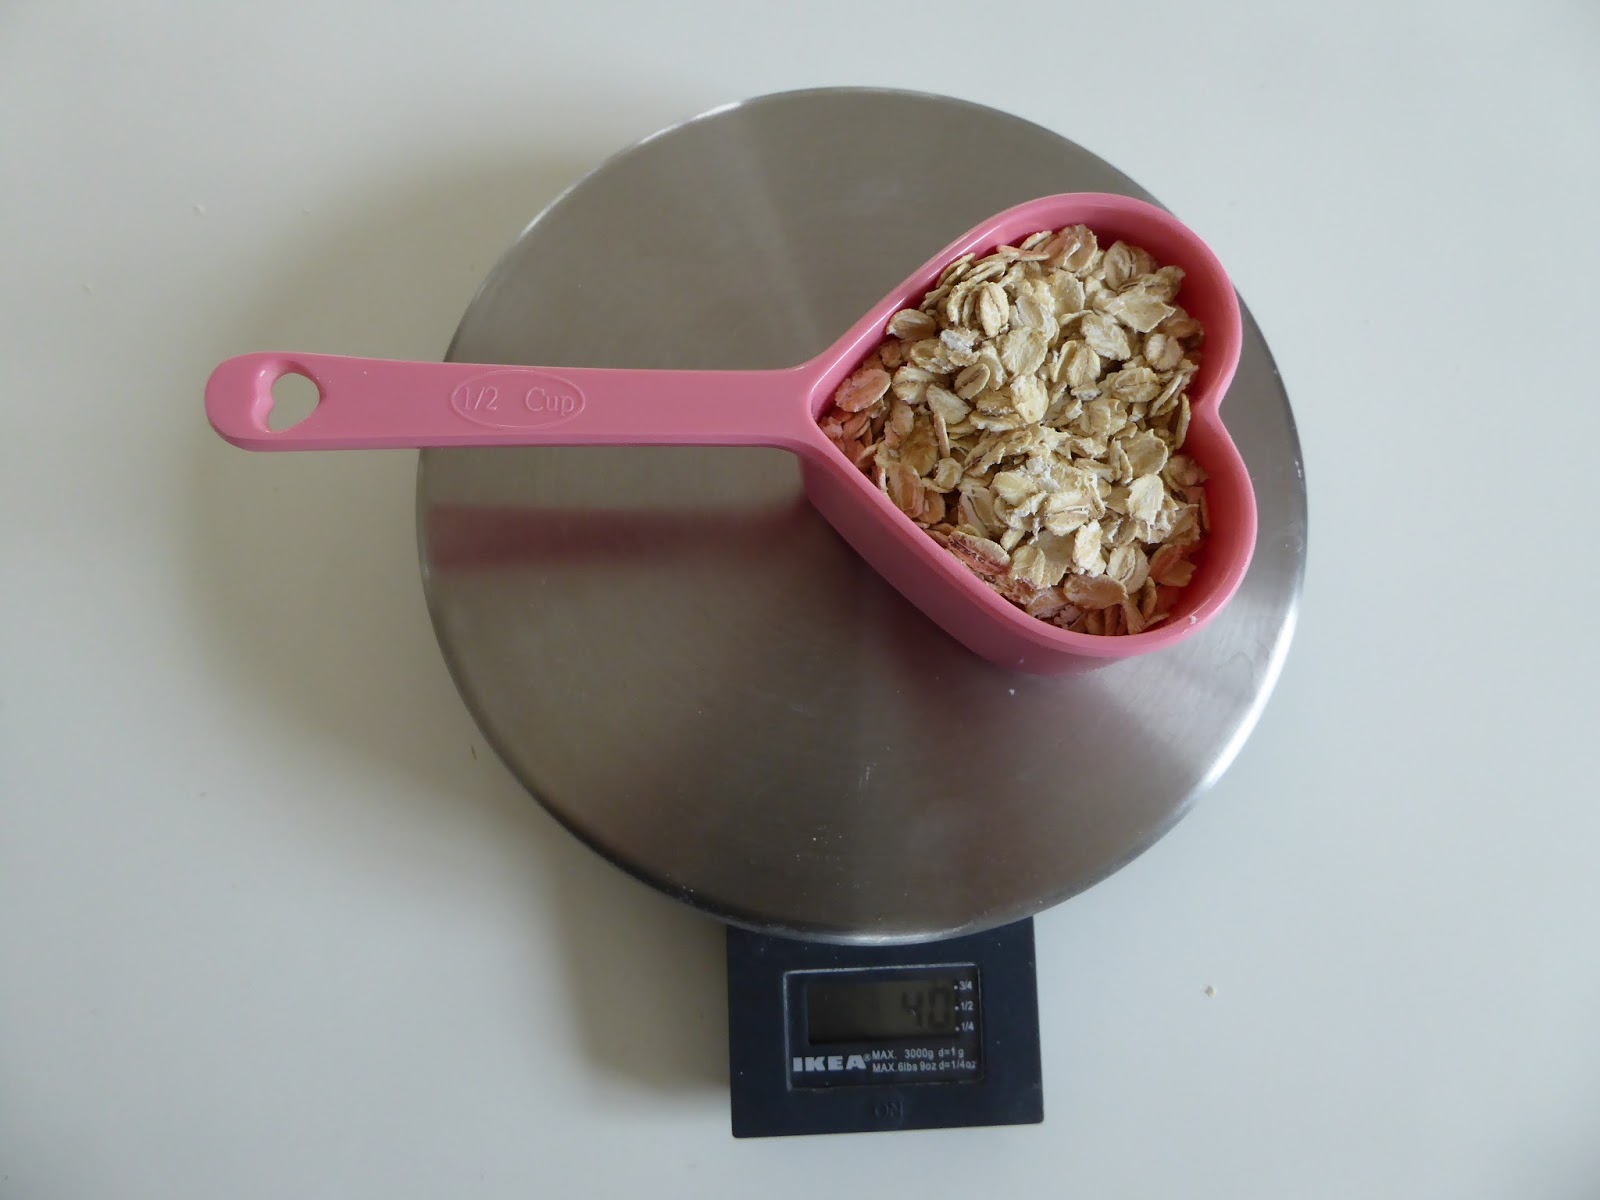 Family FECS: Manganese: Just 1/2 Cup Raw Oats (40g) A Day